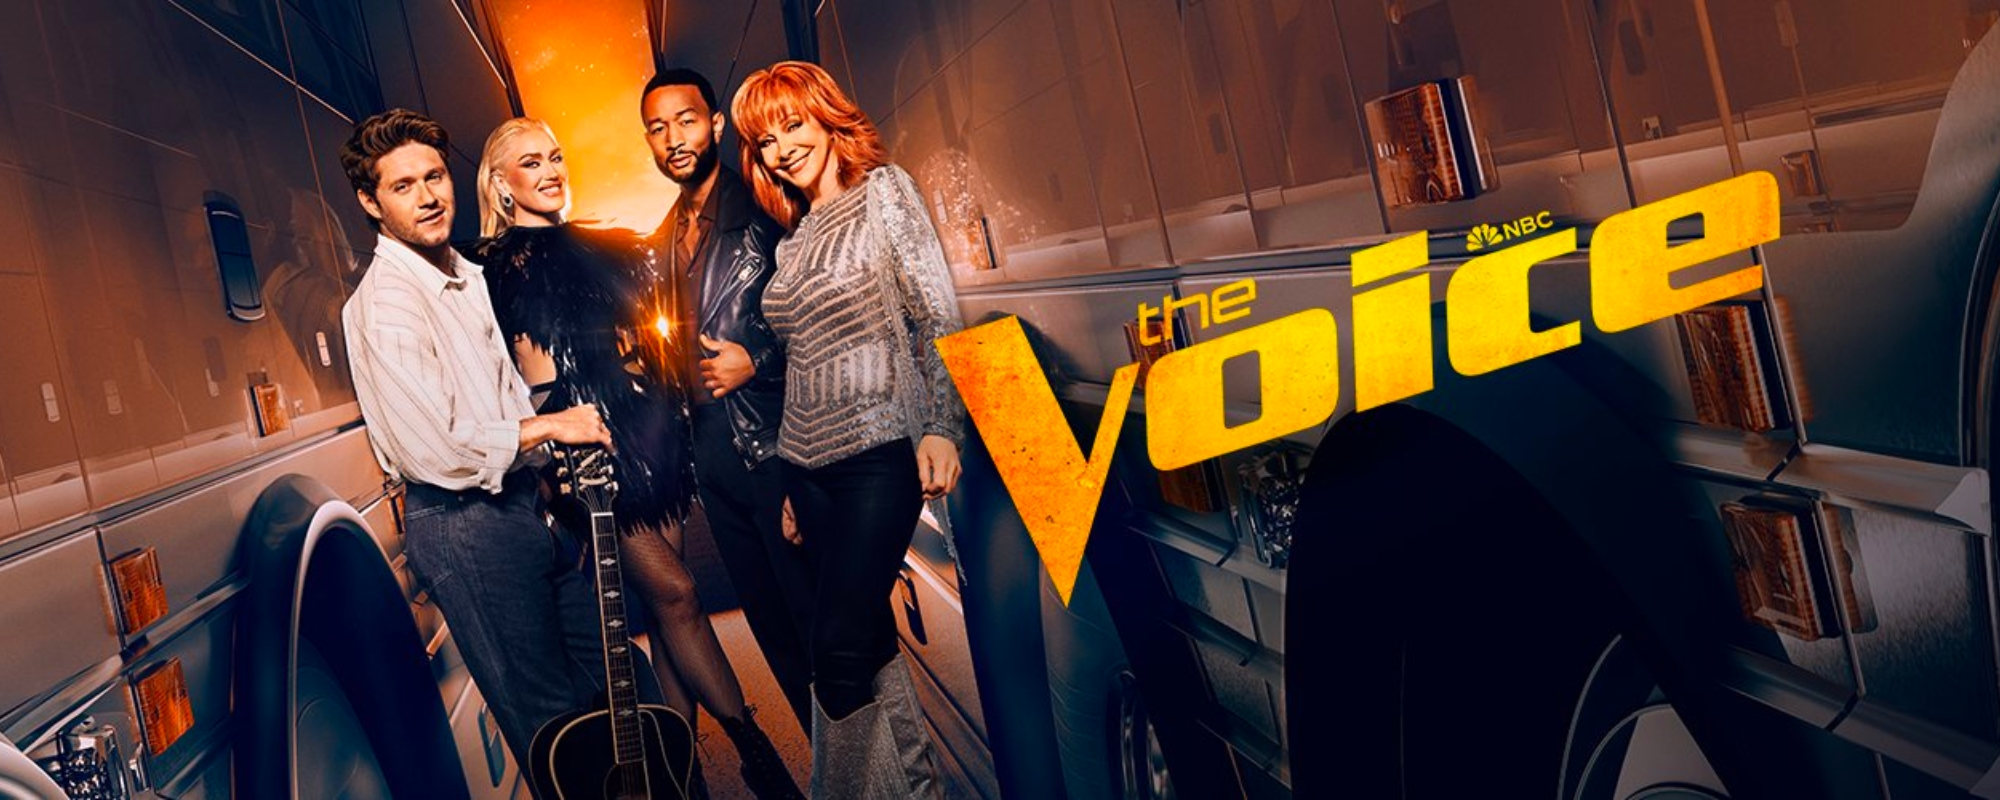 Is There a New Episode of ‘The Voice’ Tonight? How to Watch Season 24 Playoffs